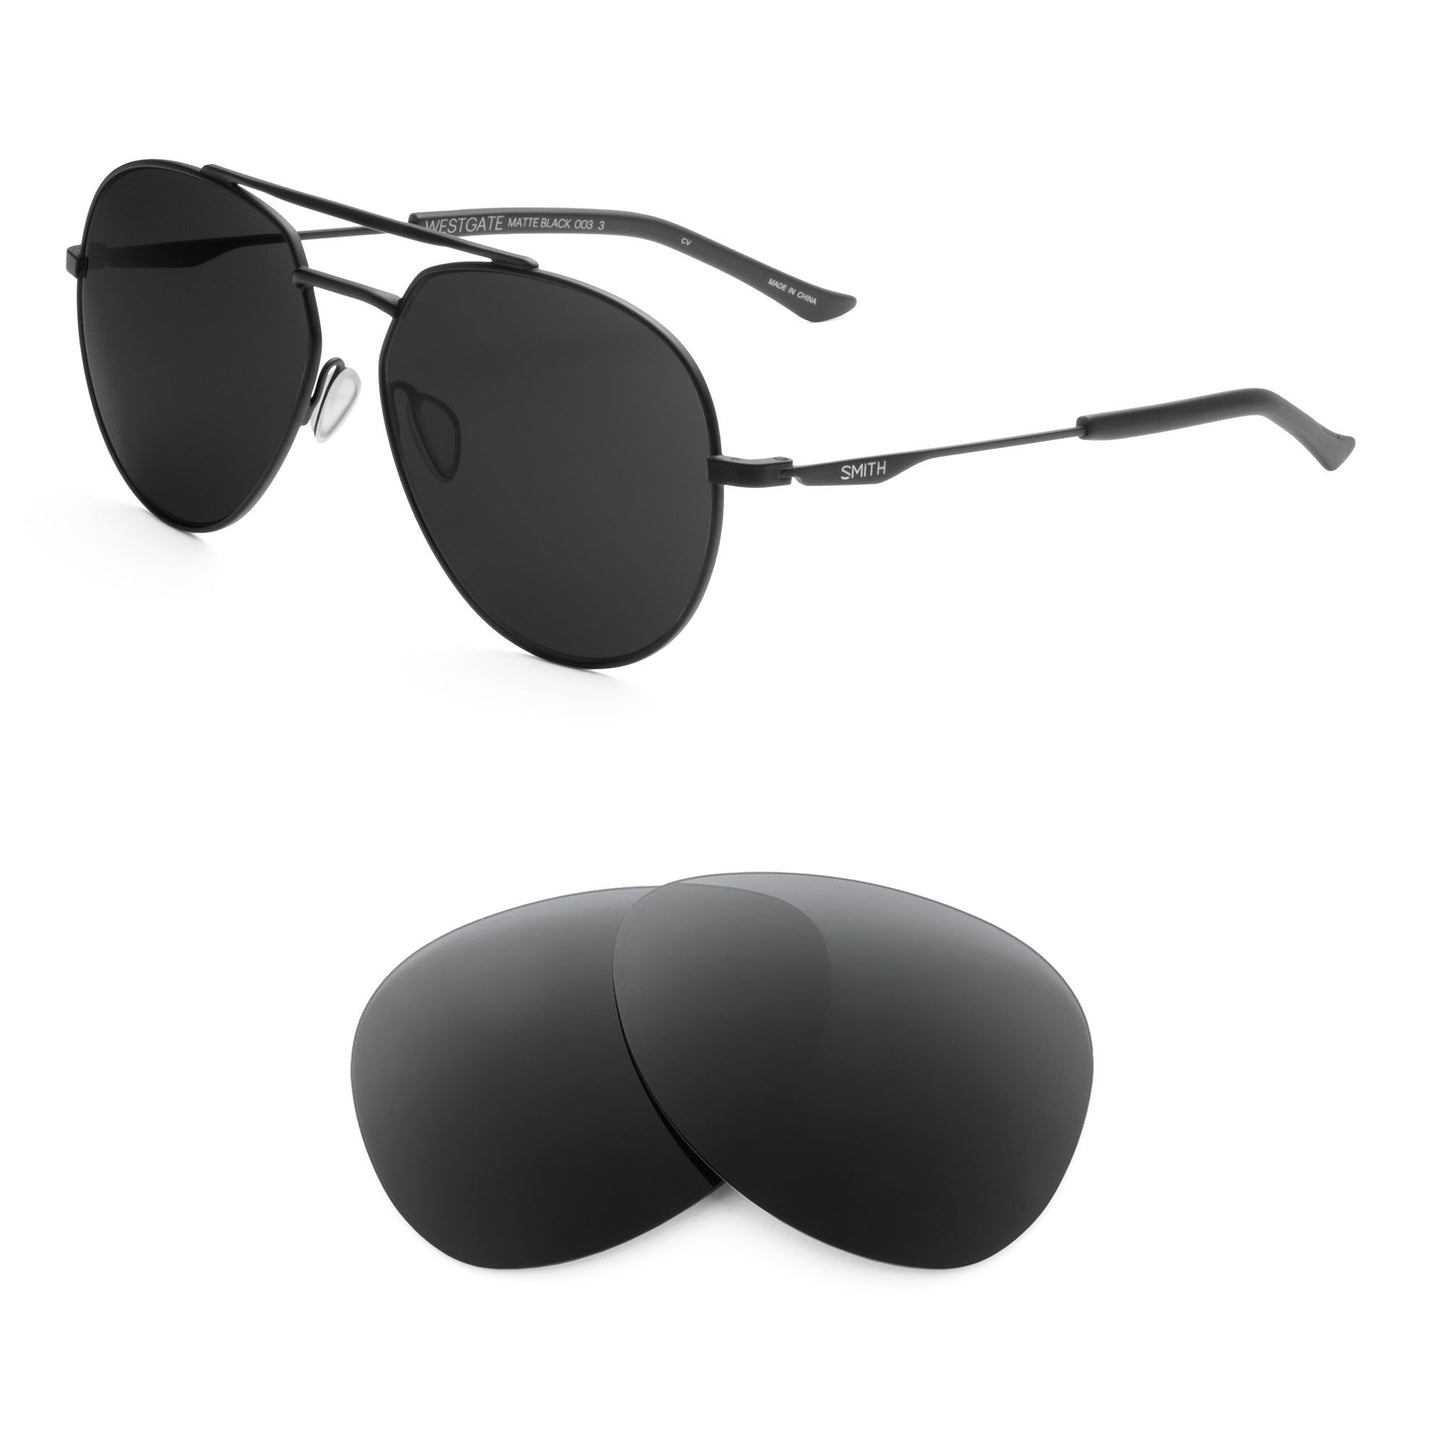 Smith Westgate sunglasses with replacement lenses